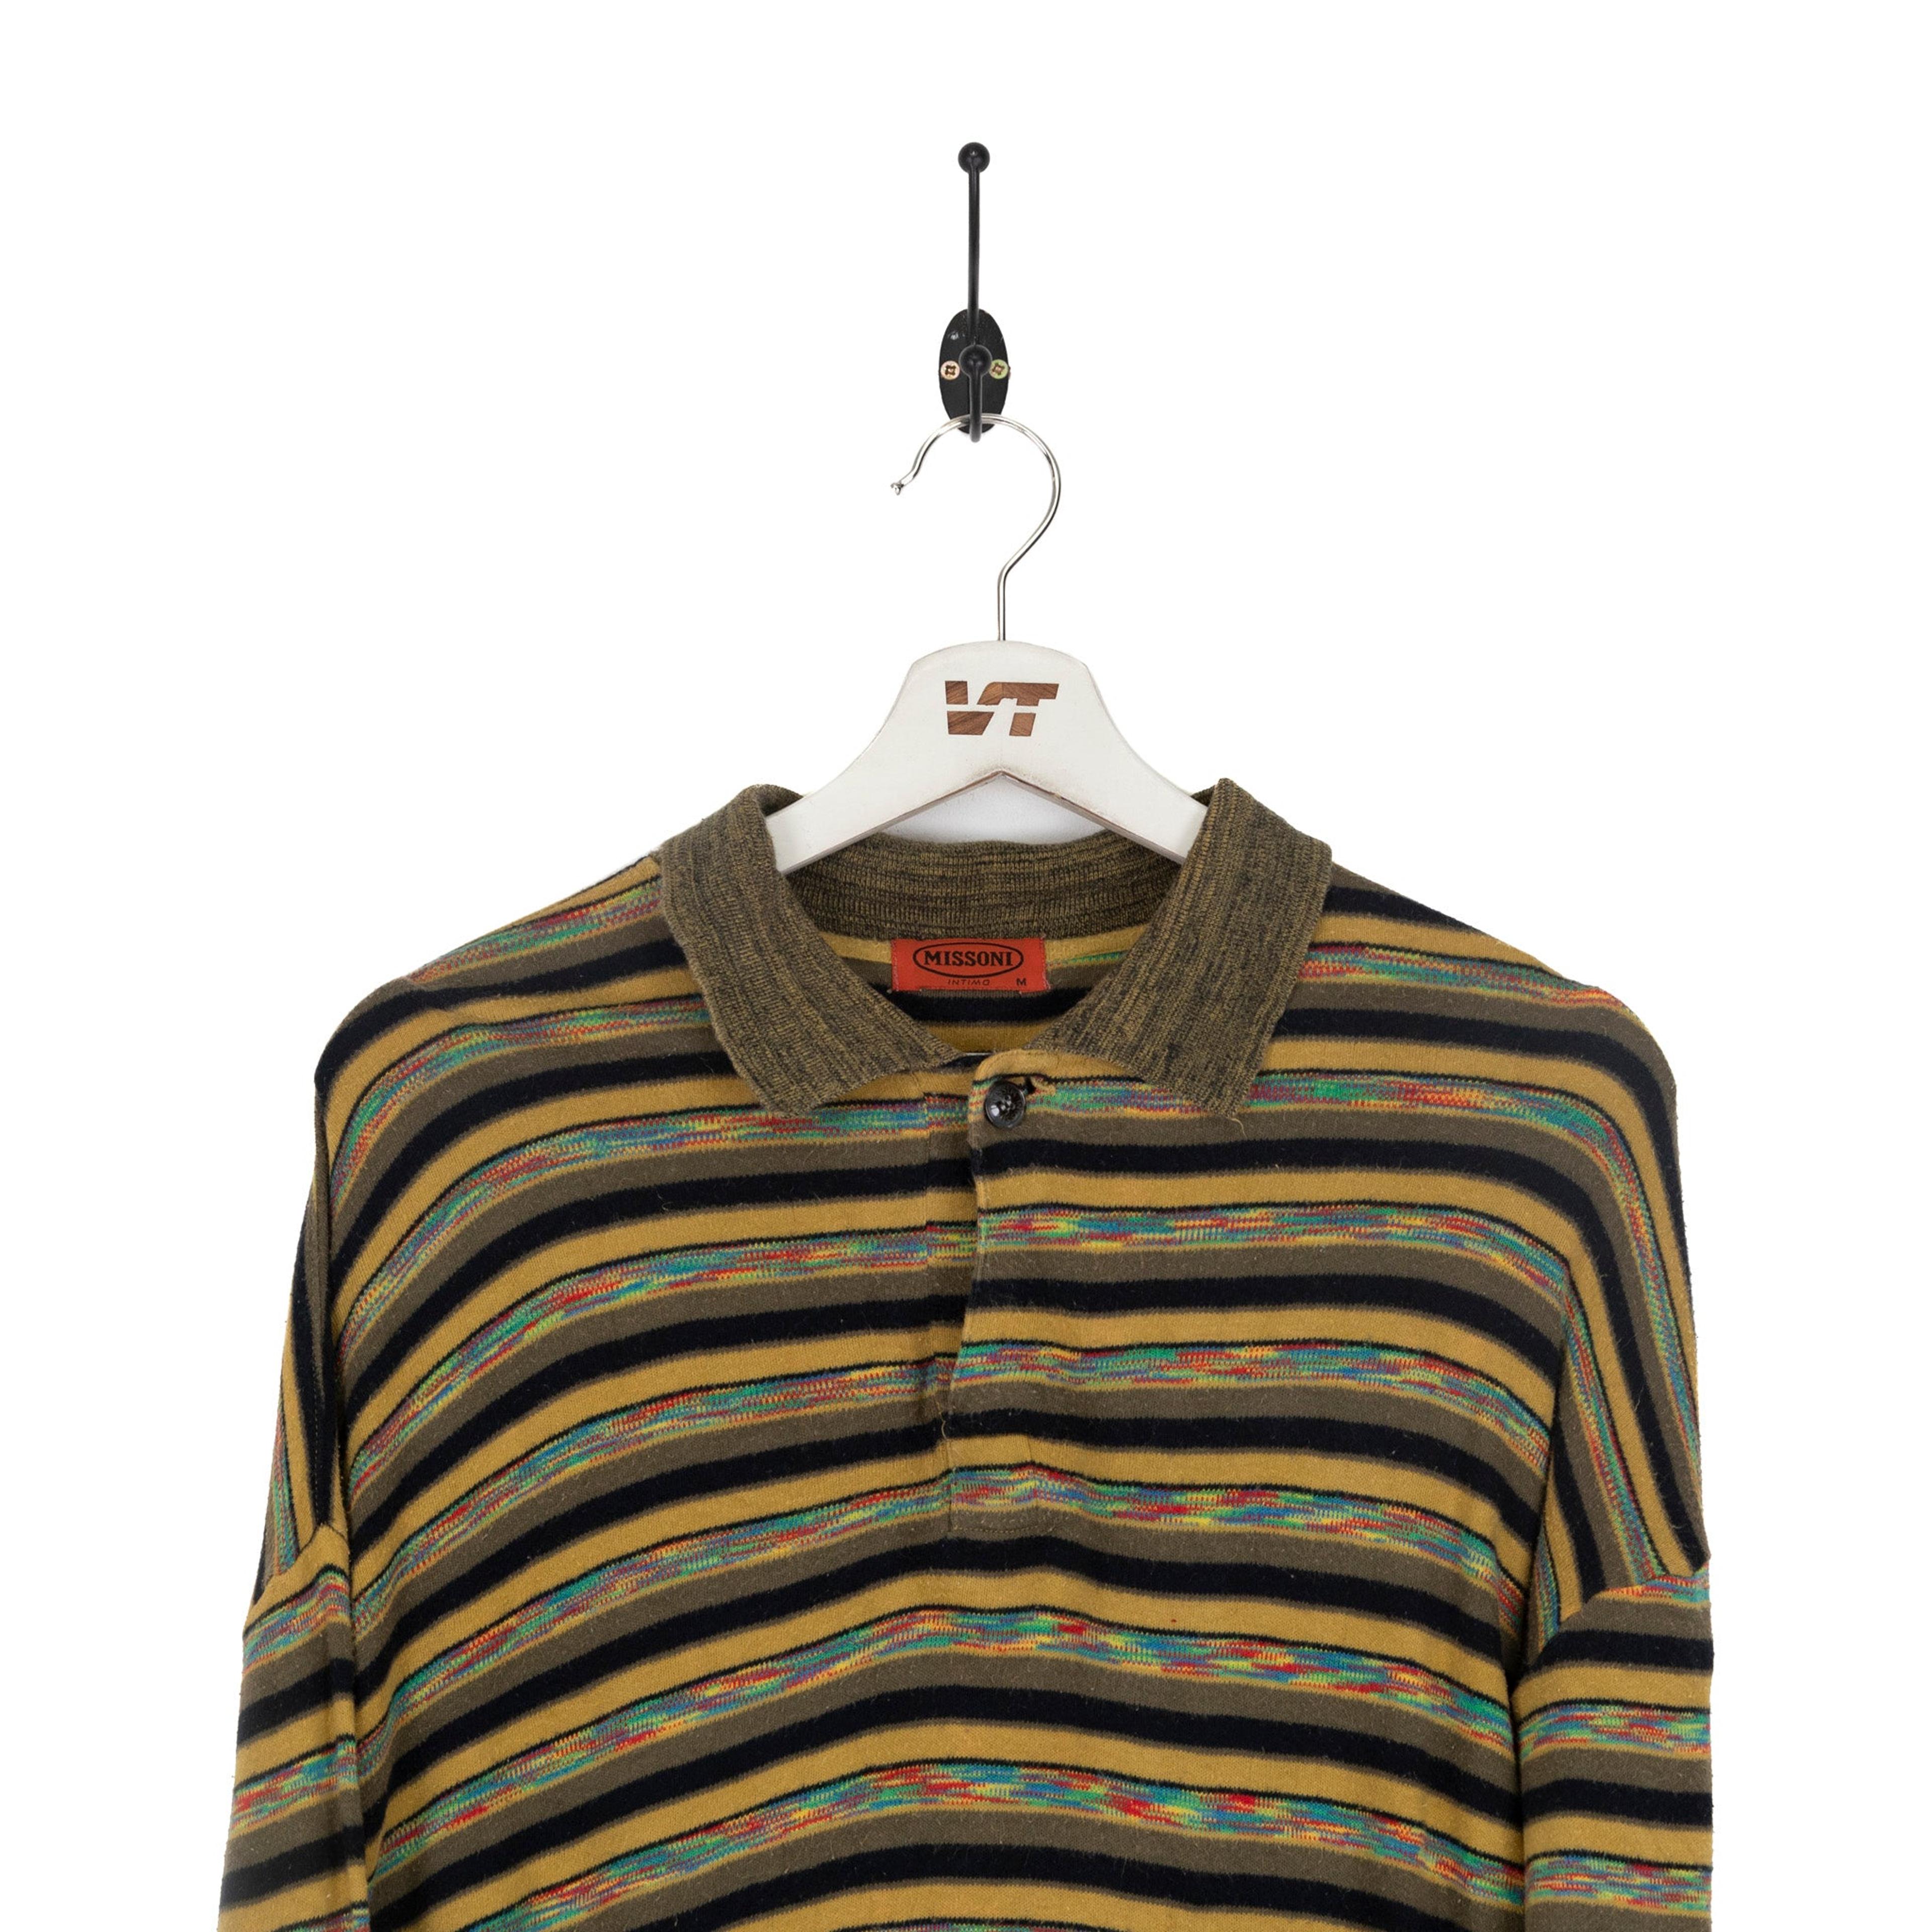 Alternate View 1 of Missoni Intimo Striped Abstract Sweater